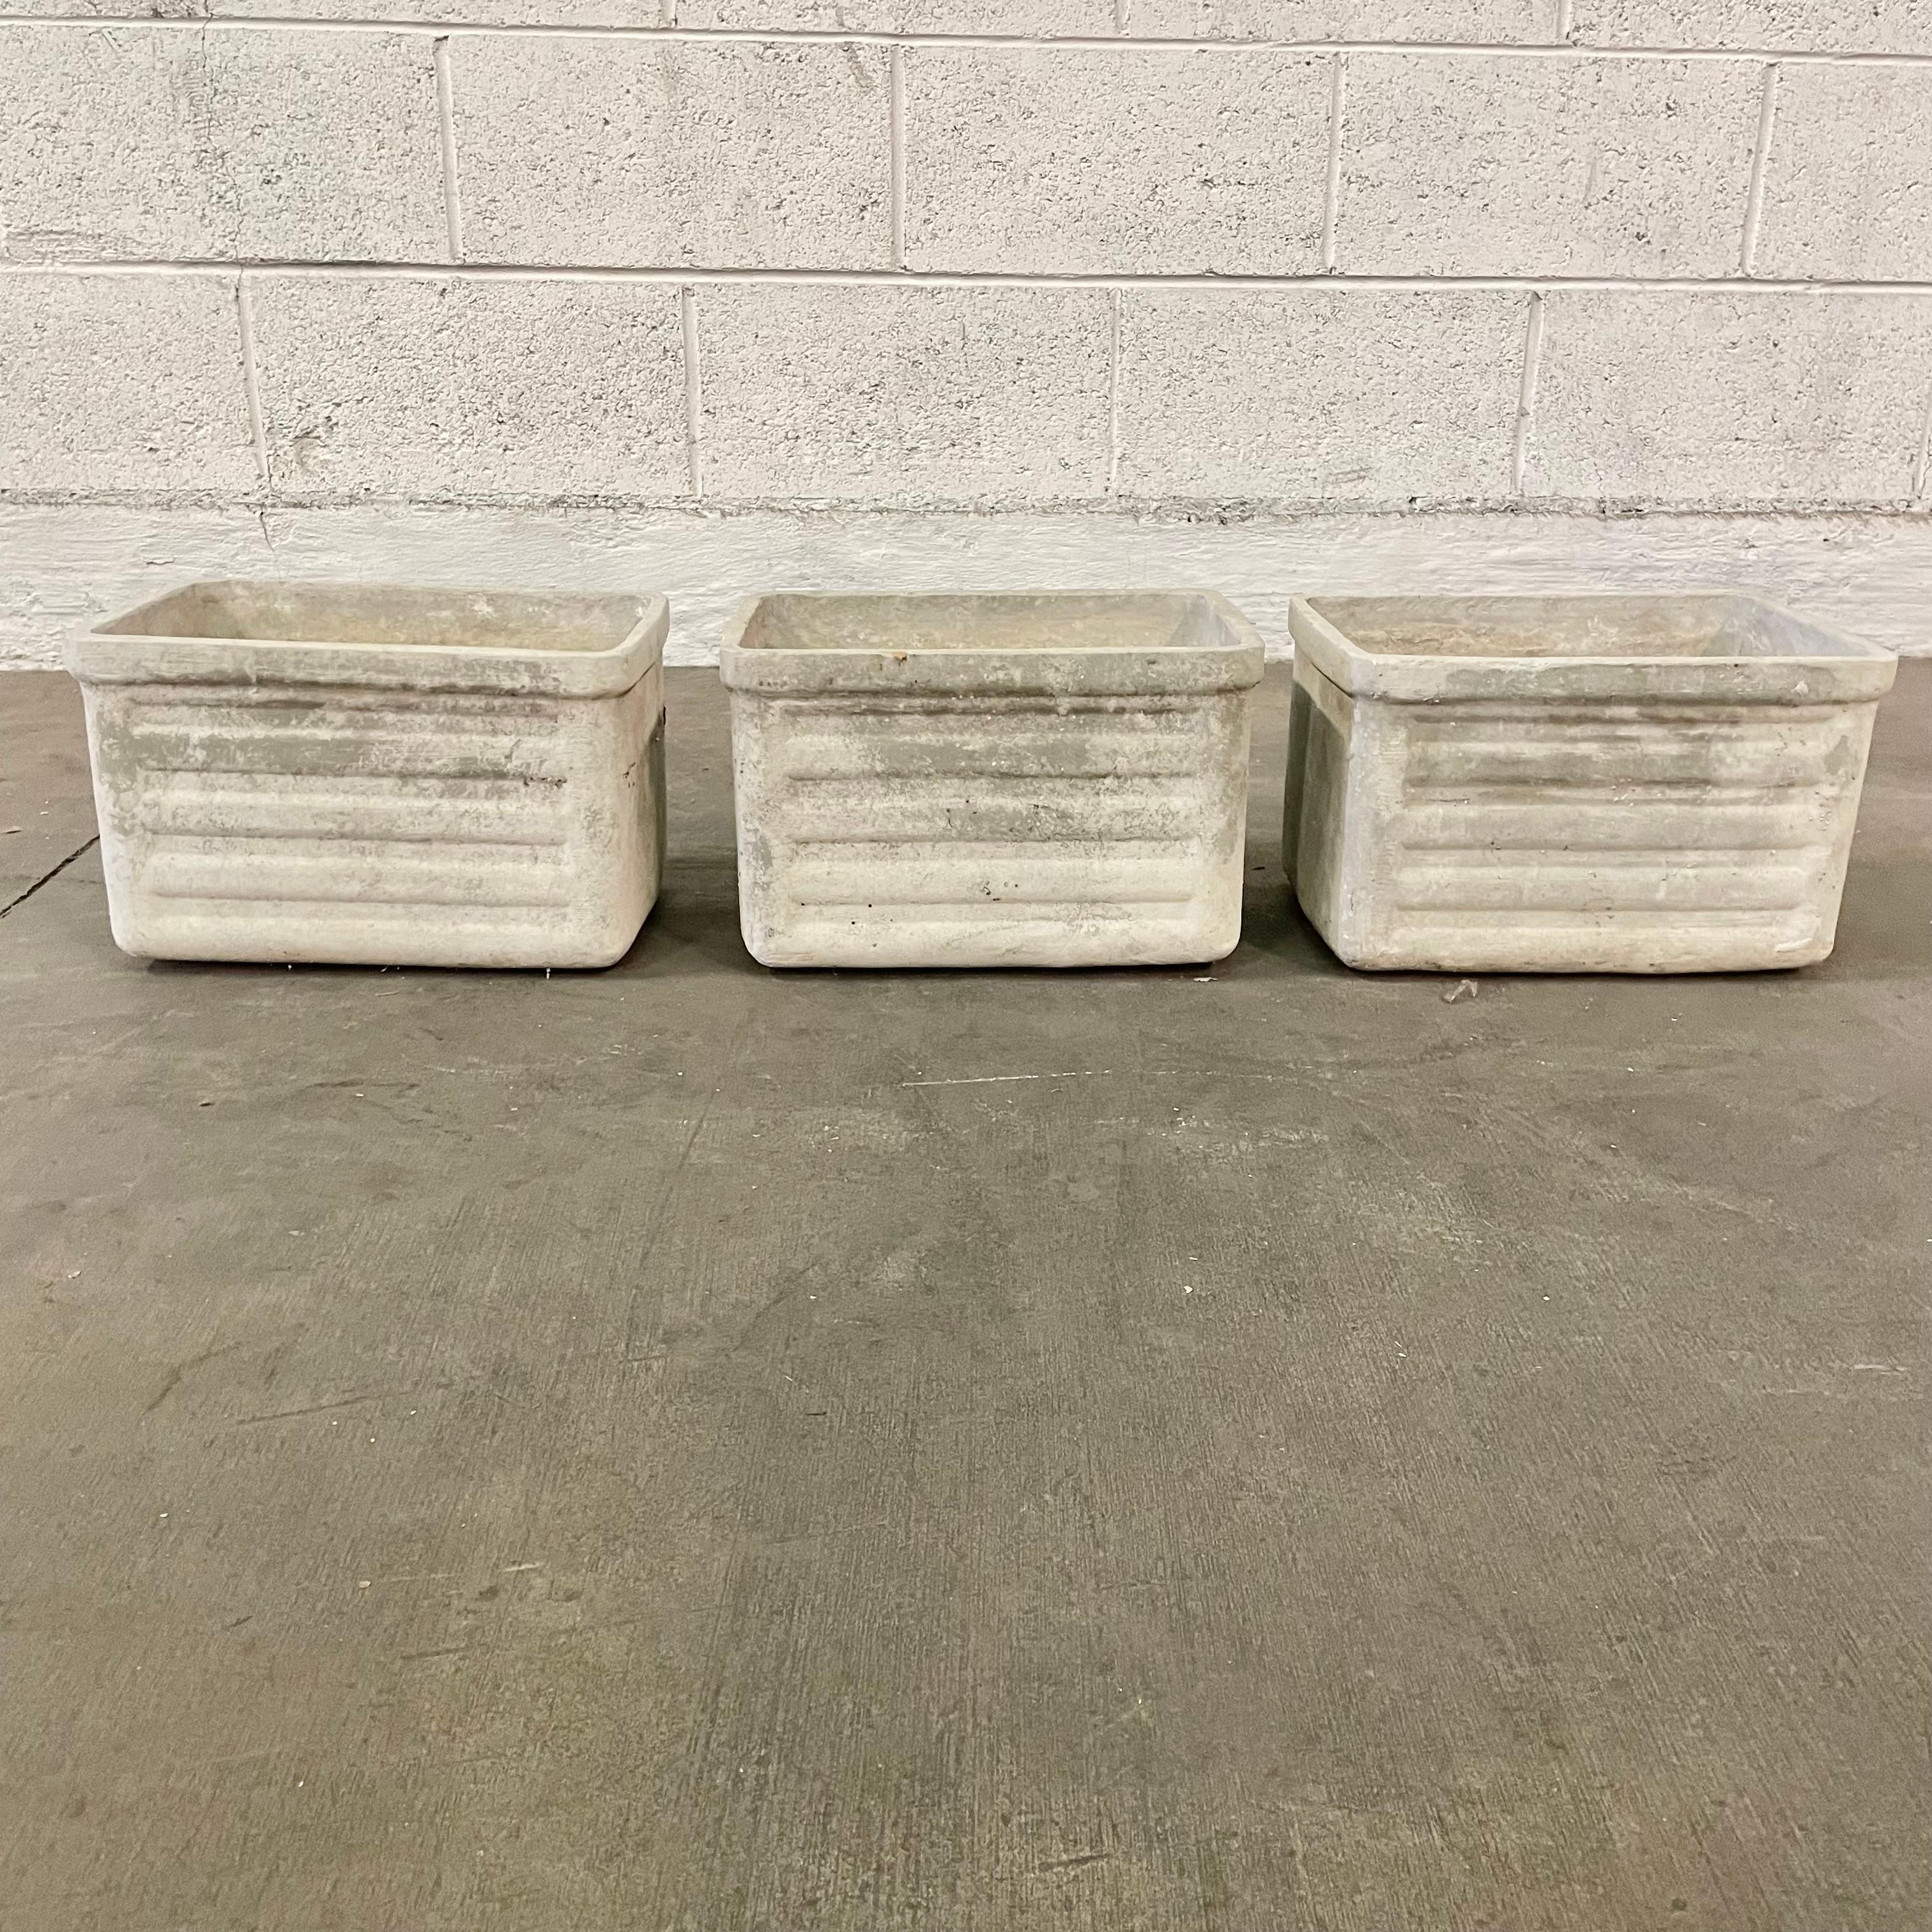 Petite ridged planters by Willy Guhl. Concrete planters in the shape of a rectangle with an upper rim and ridged sides. Great scale. Very good condition with similar patina on all 5 available. Priced individually. 

   